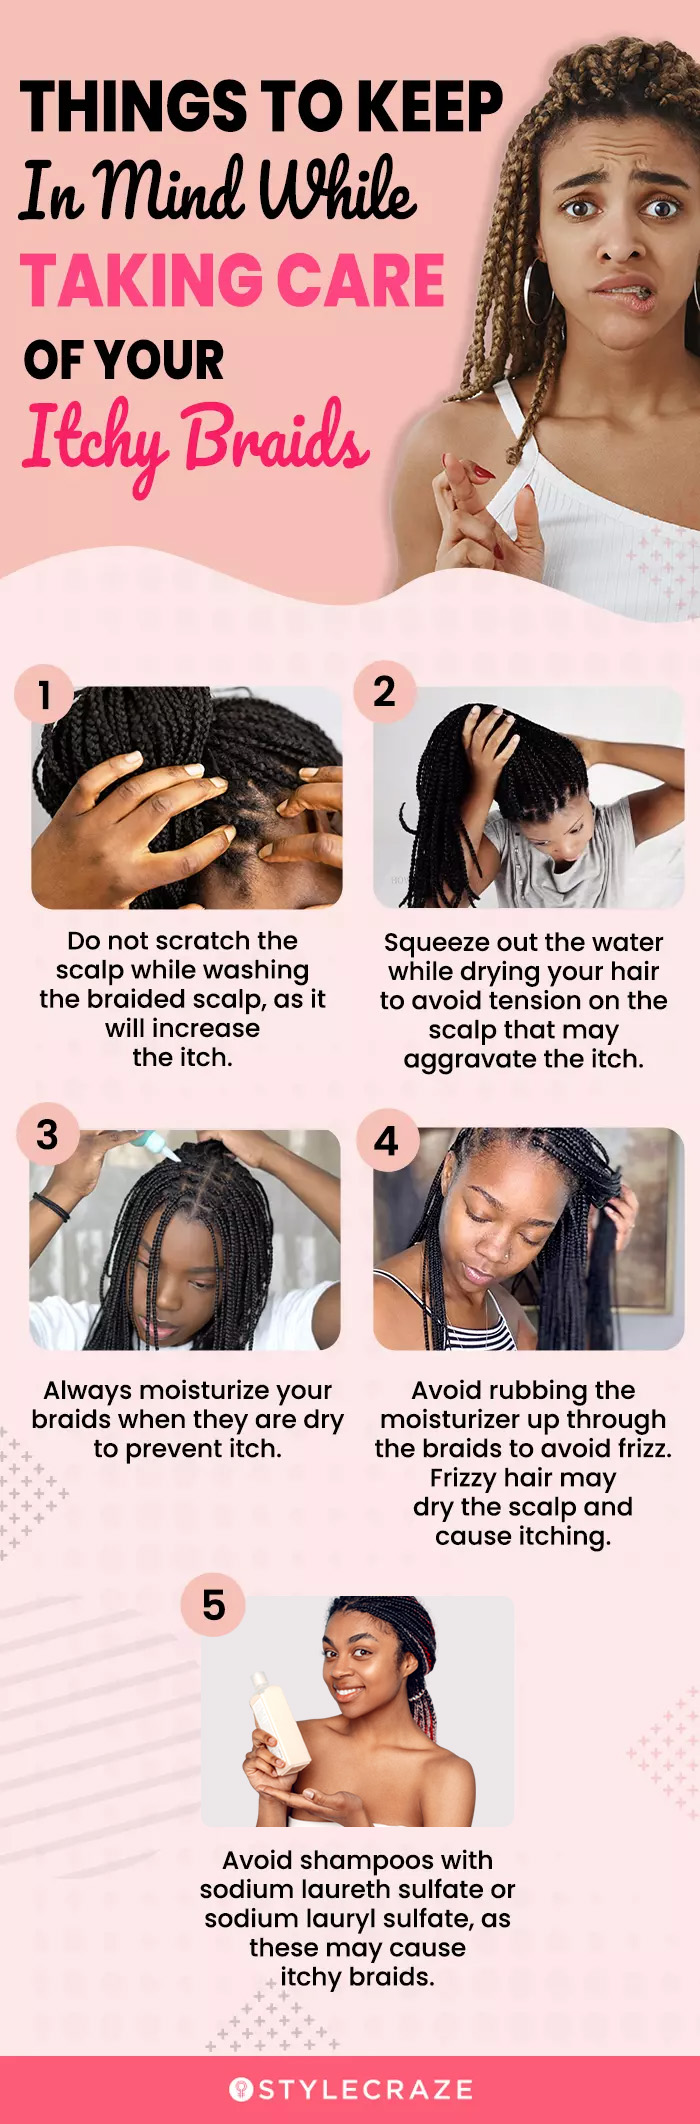 things to keep in mind while taking care of your itchy braids (infographic)